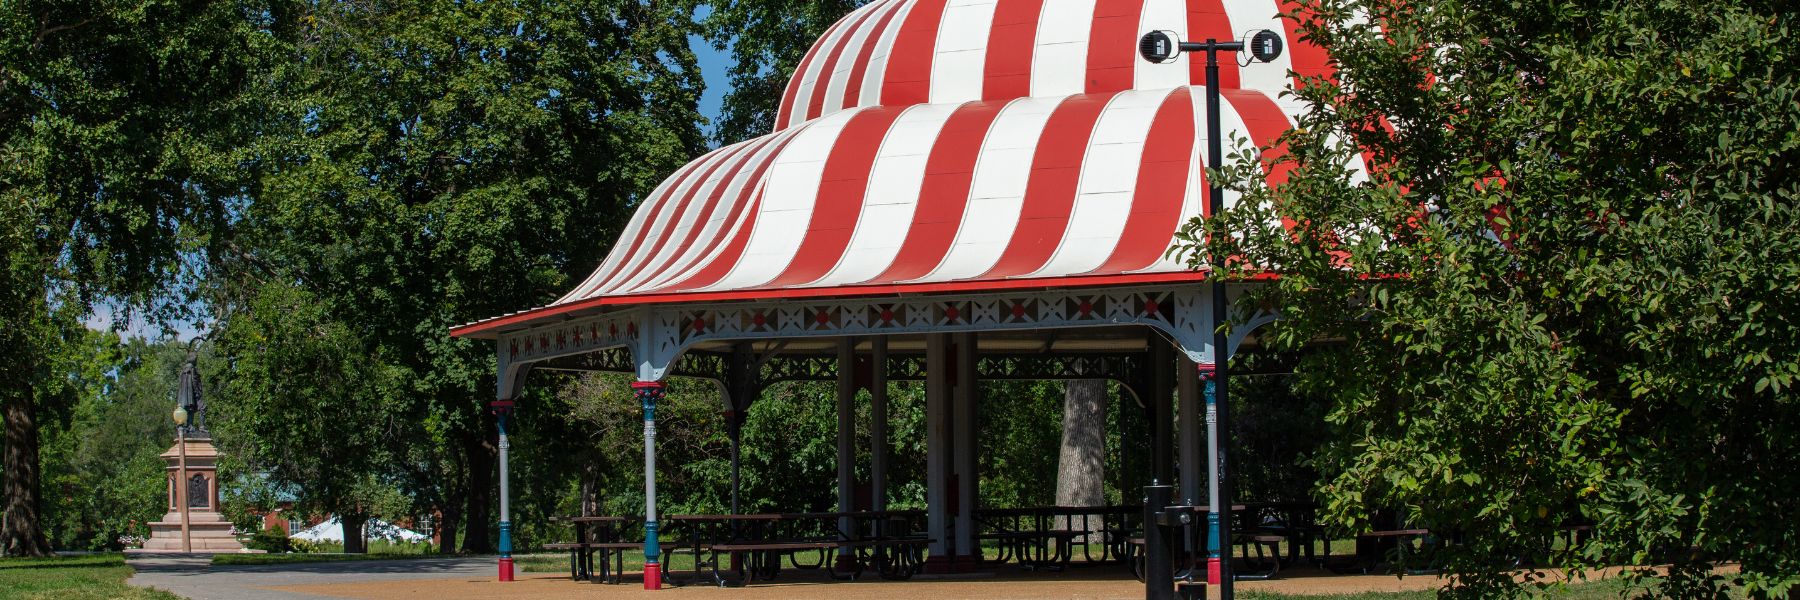 Vibrant pavilions make Tower Grove Park one of the most iconic parks in St. Louis.